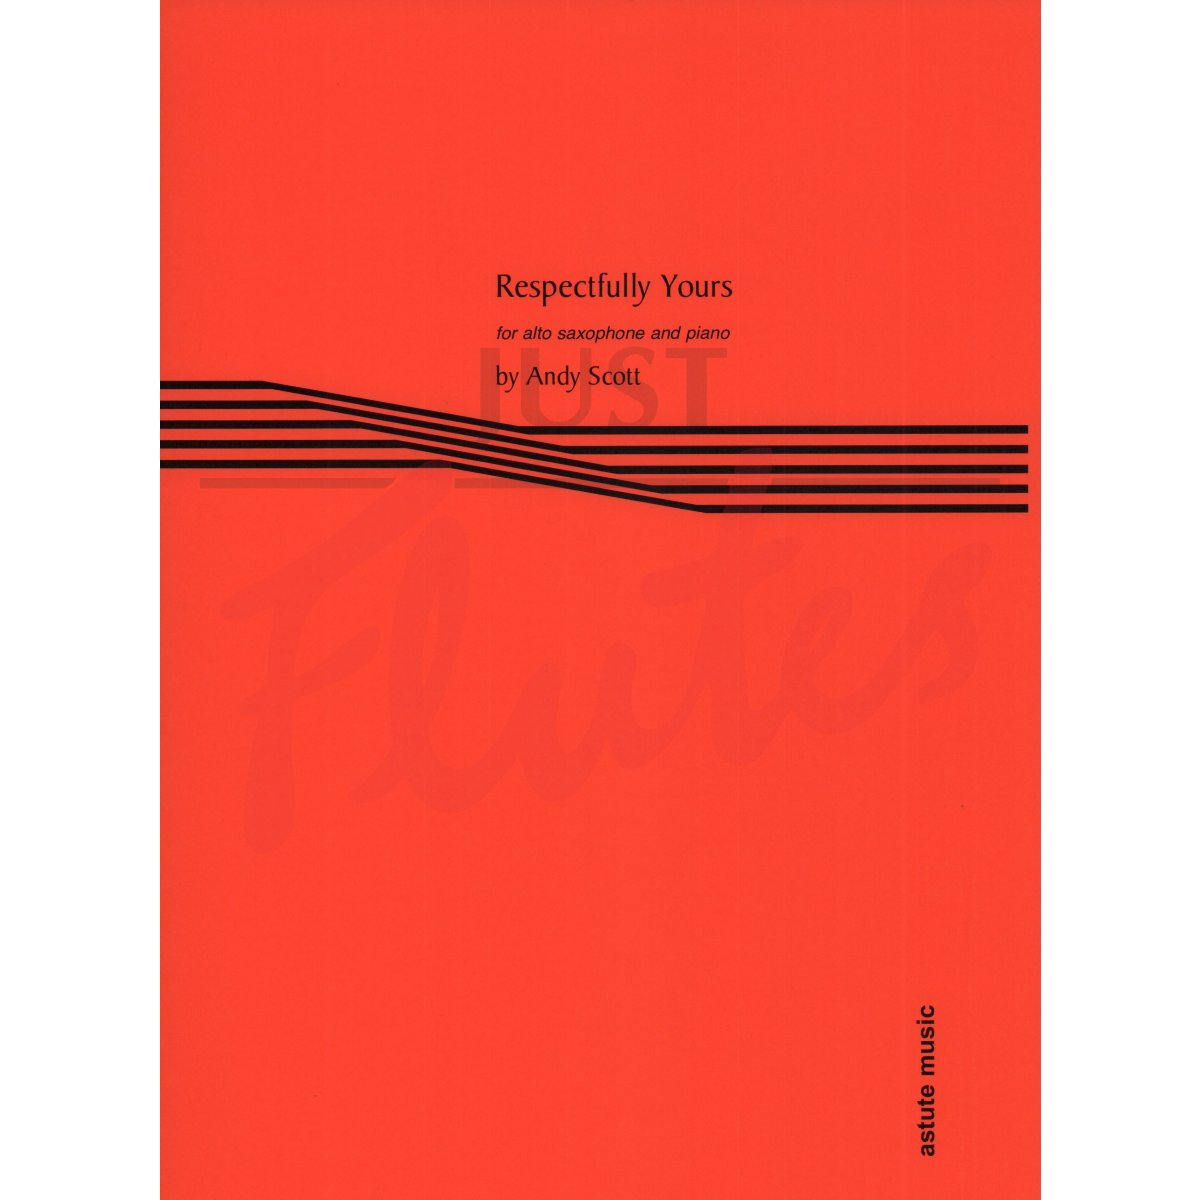 Respectfully Yours for Alto Saxophone and Piano